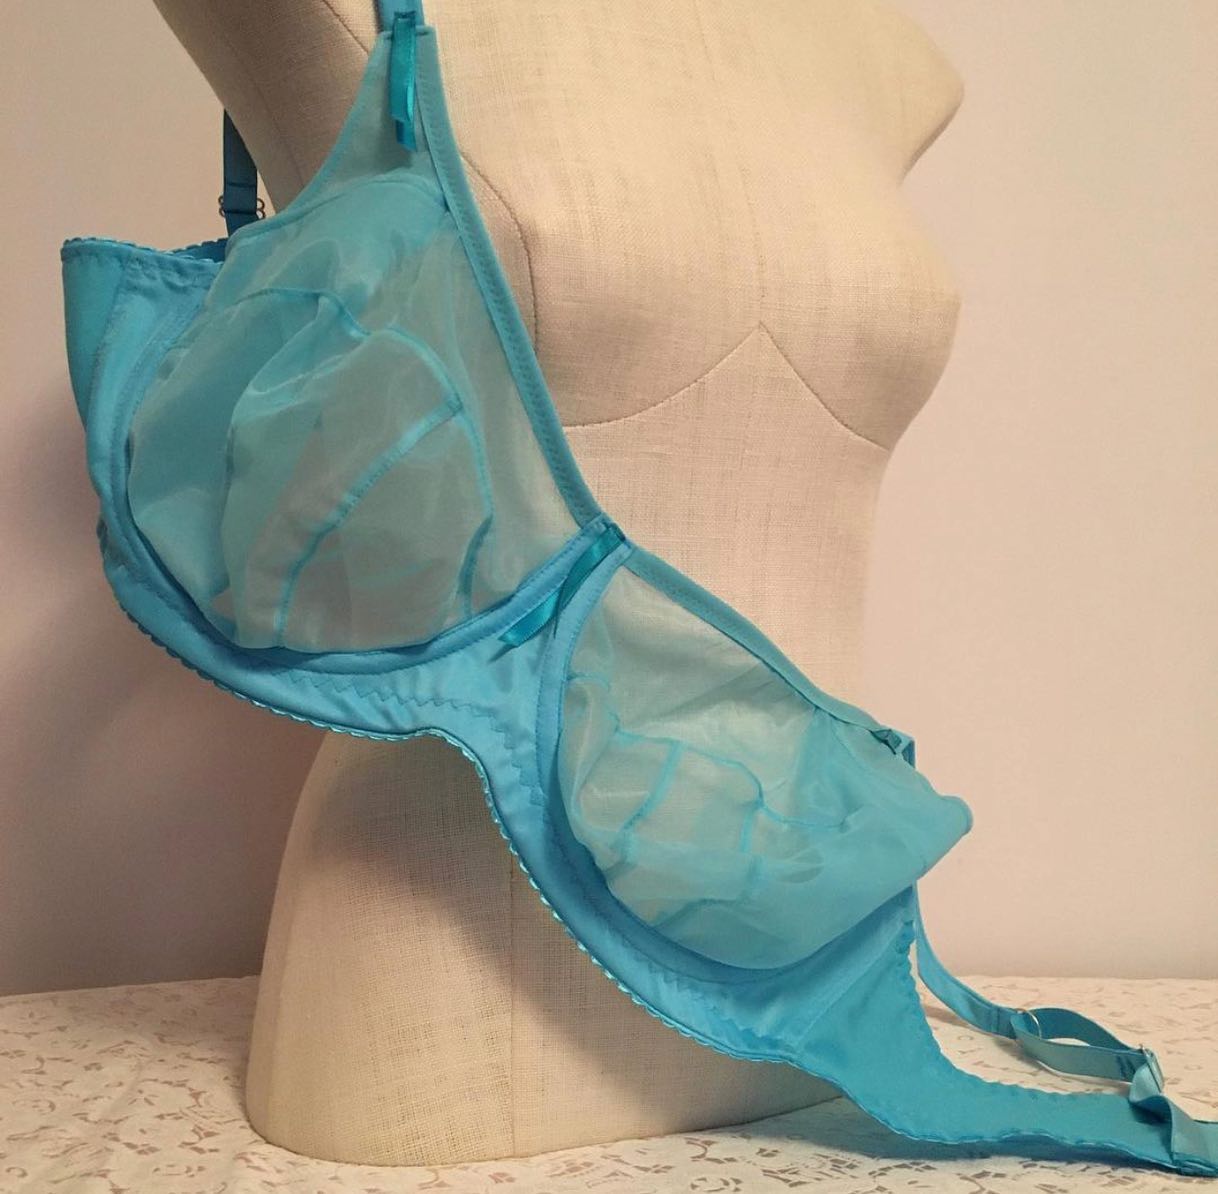 Sew in Bra Cups - Lightly Padded - A to E Cup Black (Ivory, A) :  : Fashion